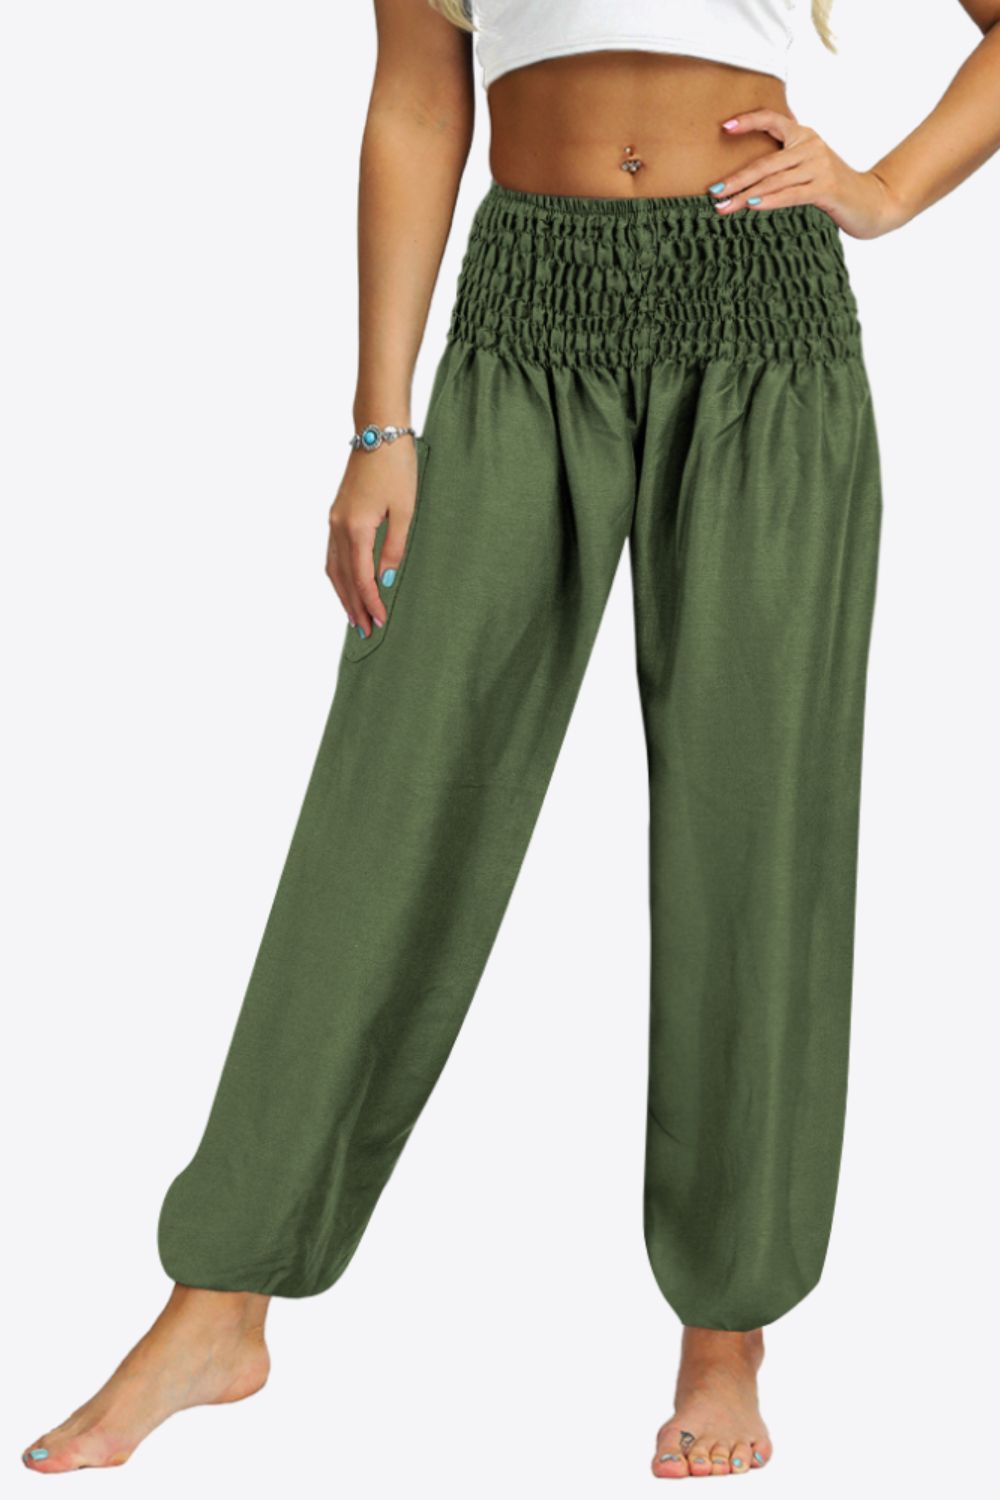 Smocked Joggers with Pockets - Green / S - Bottoms - Pants - 4 - 2024